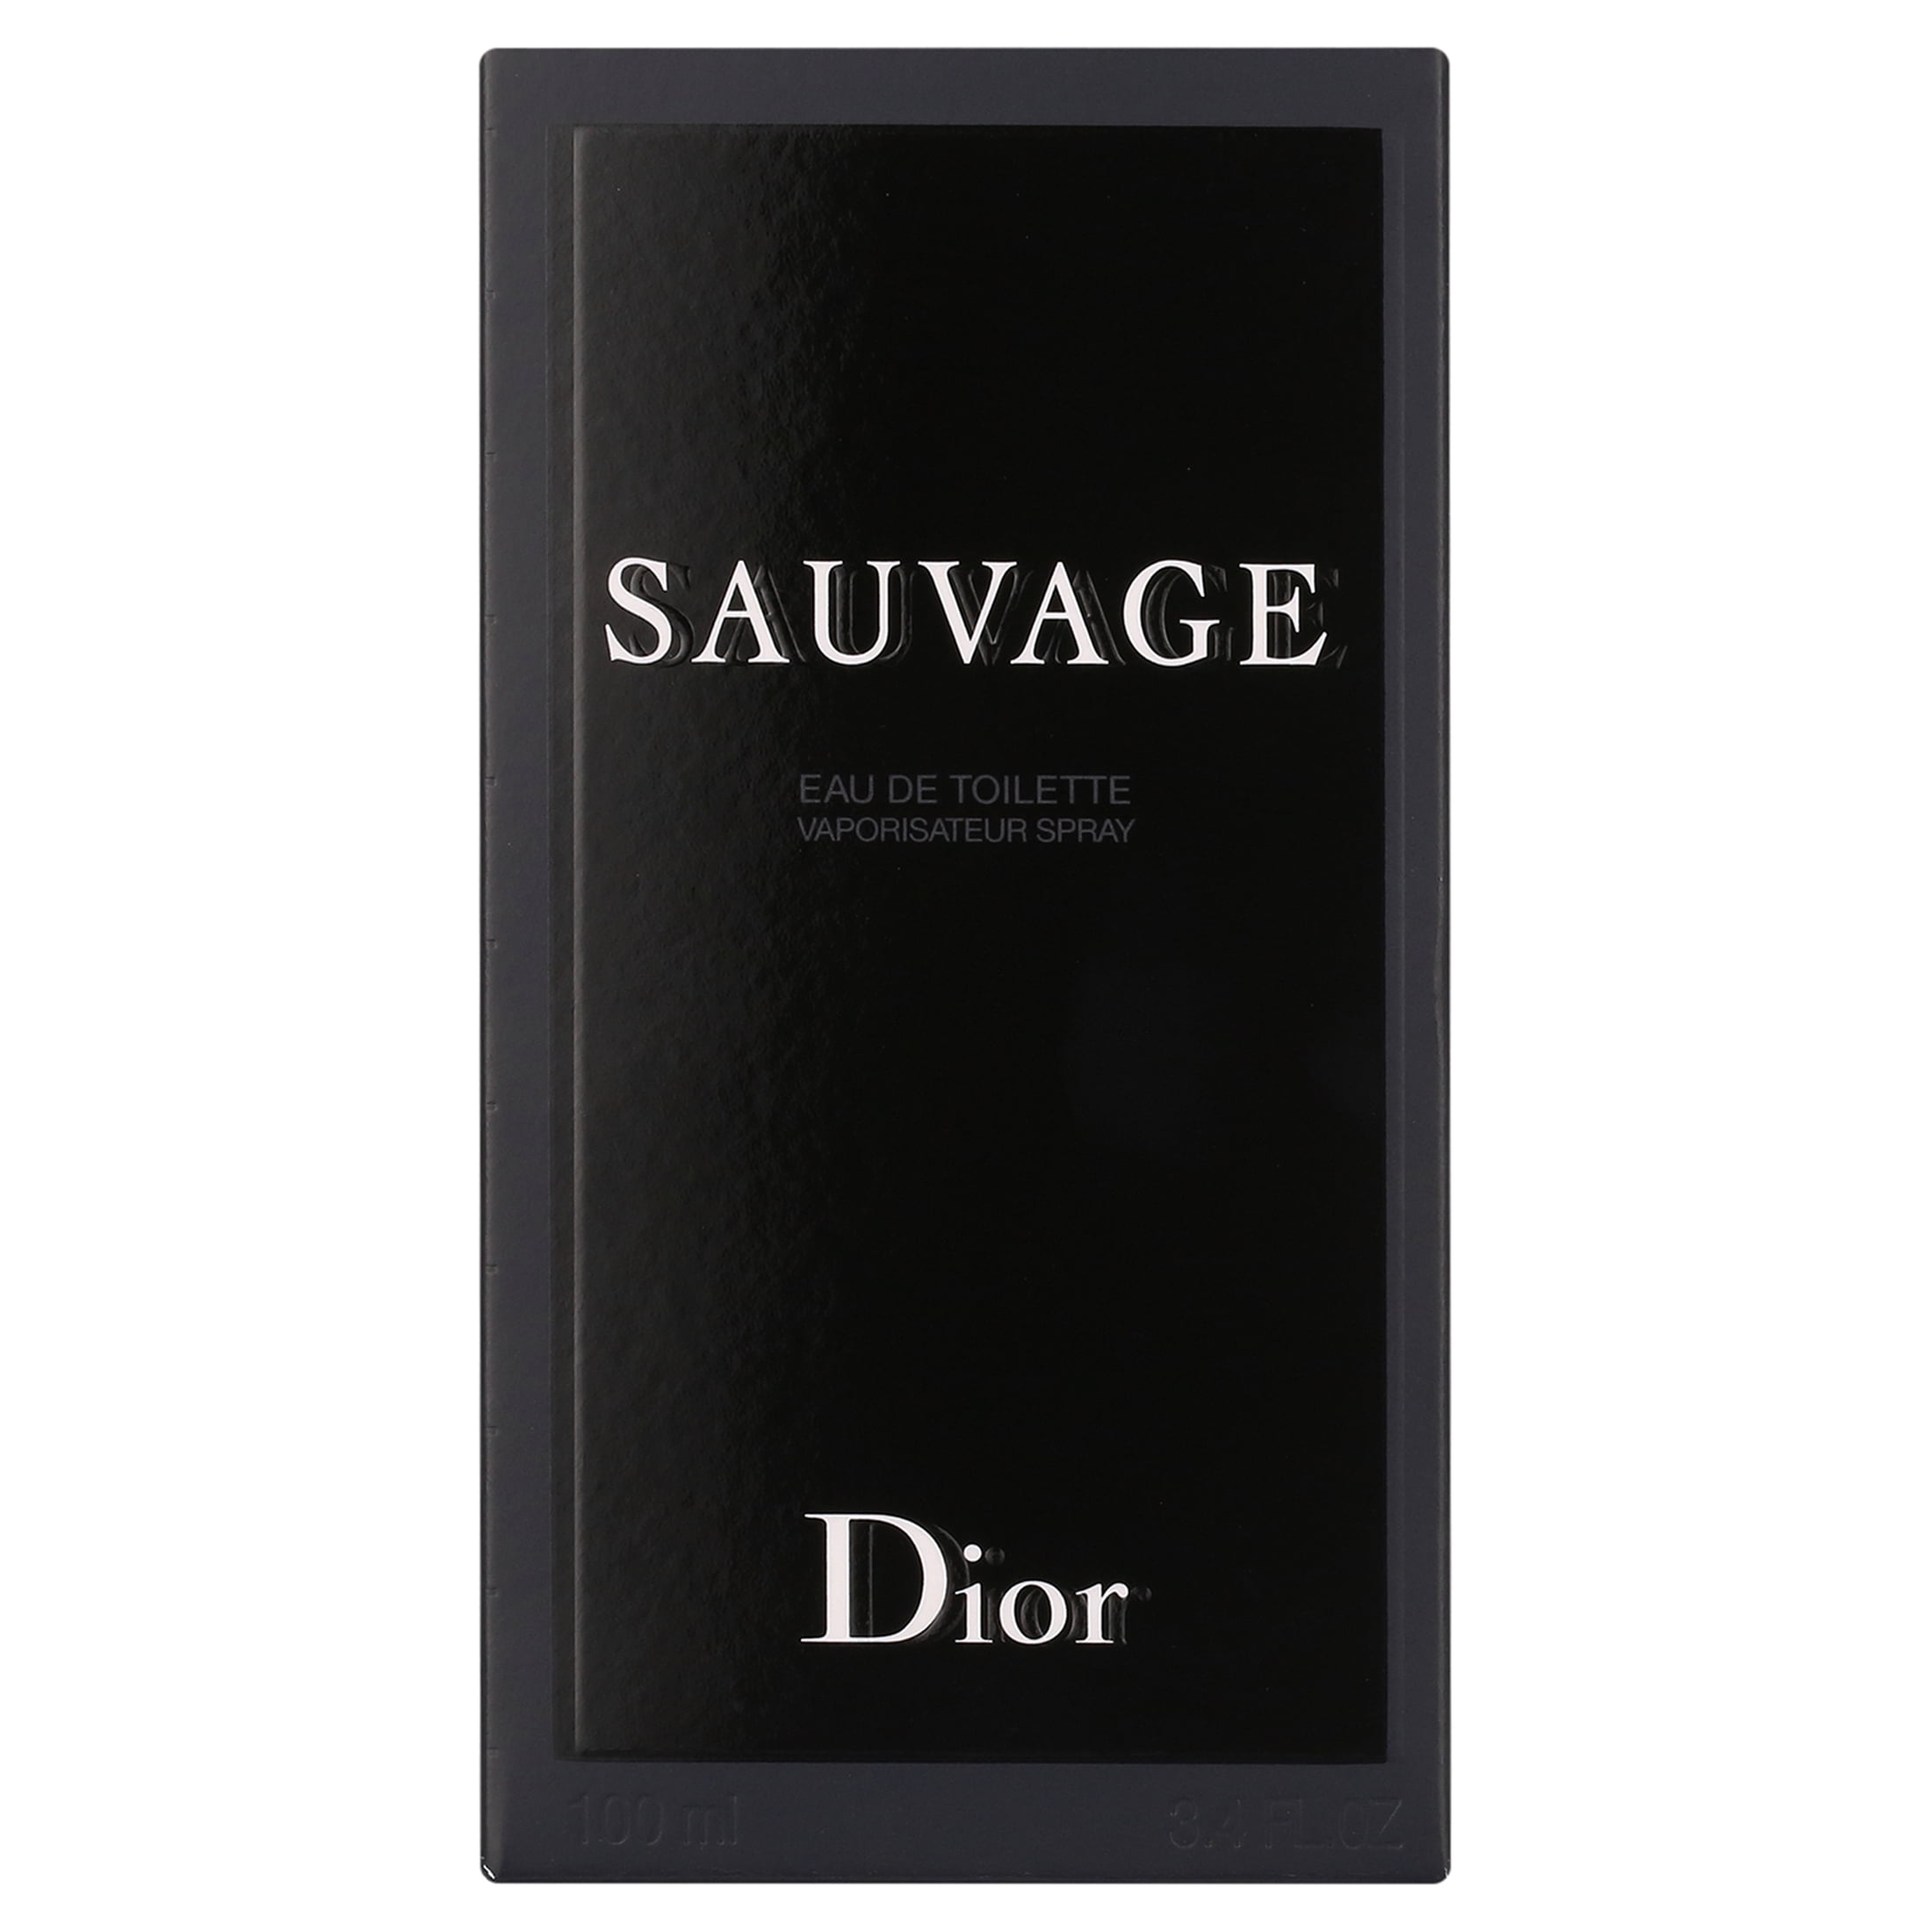 Shop Black Friday Dior Sauvage  UP TO 52 OFF